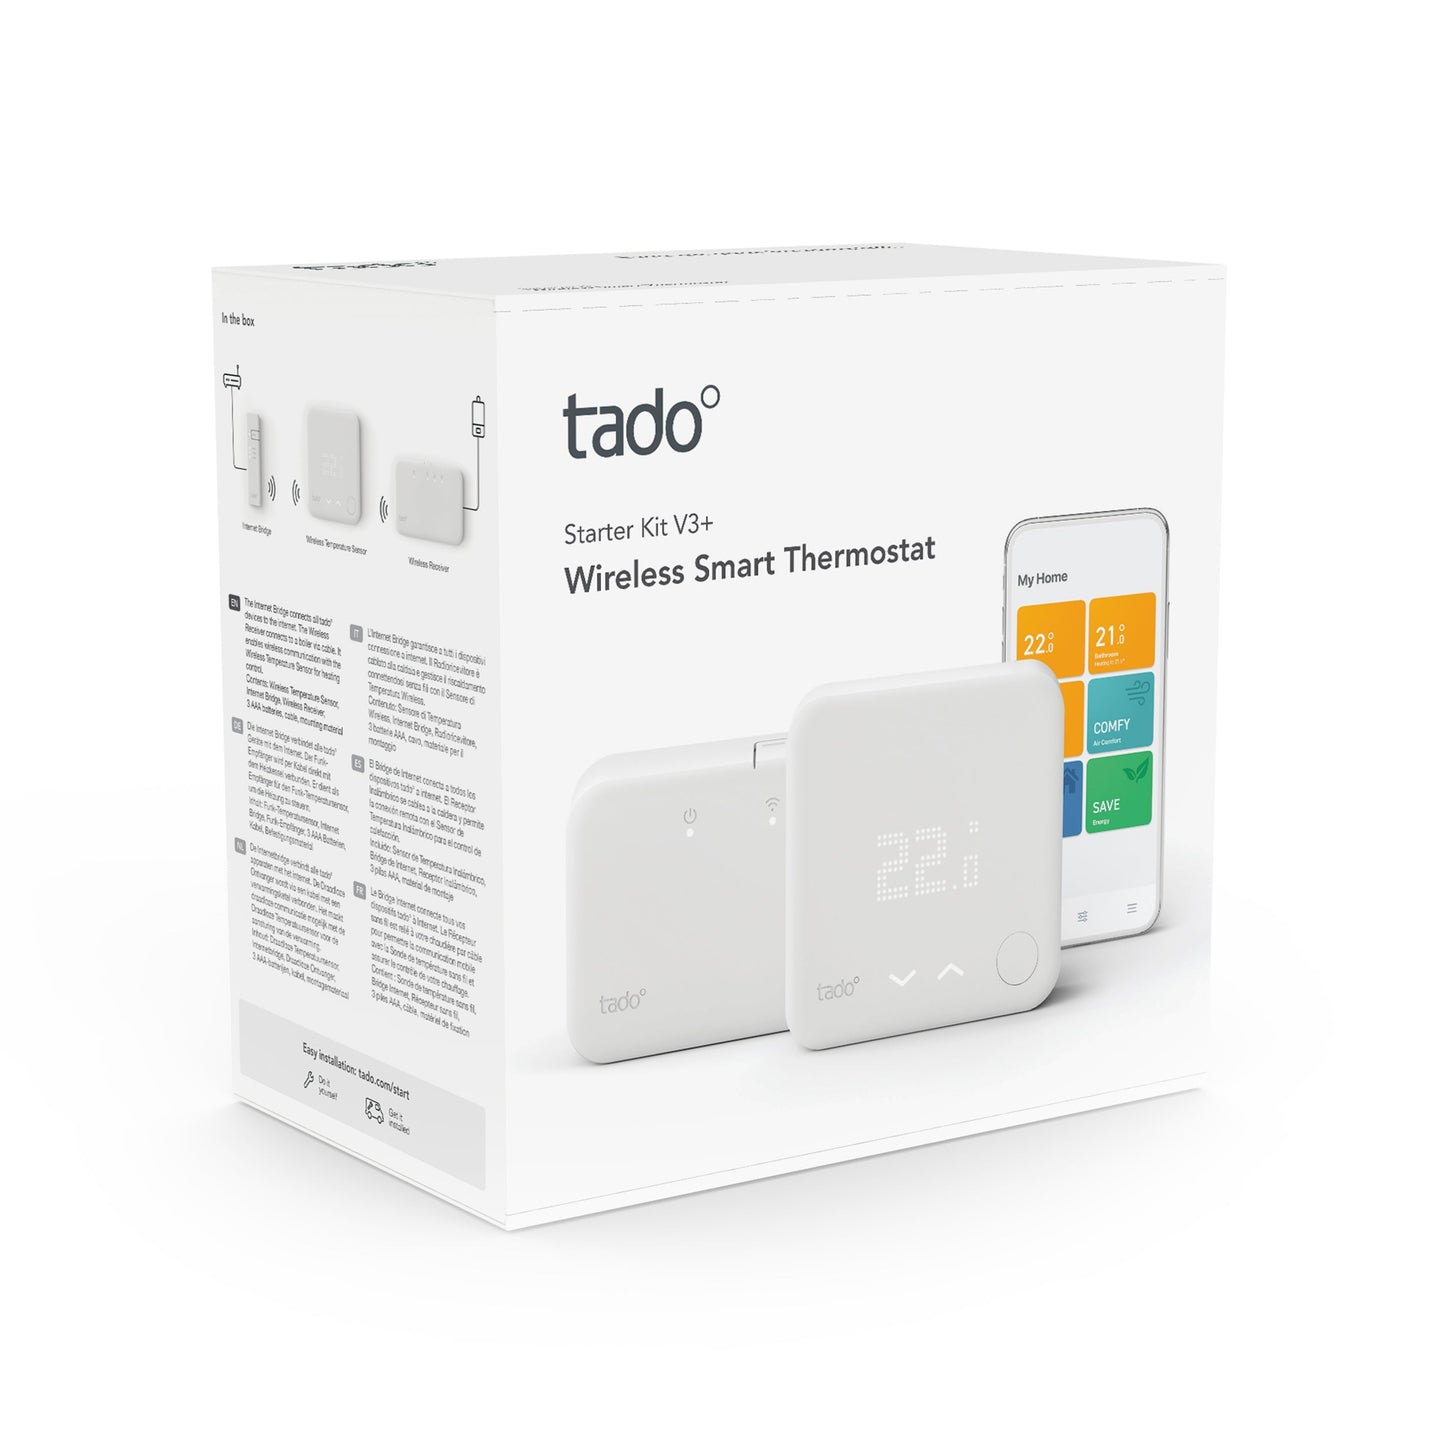 Wireless Smart Thermostat Starter Kit V3+ with Hot Water Control with installation service